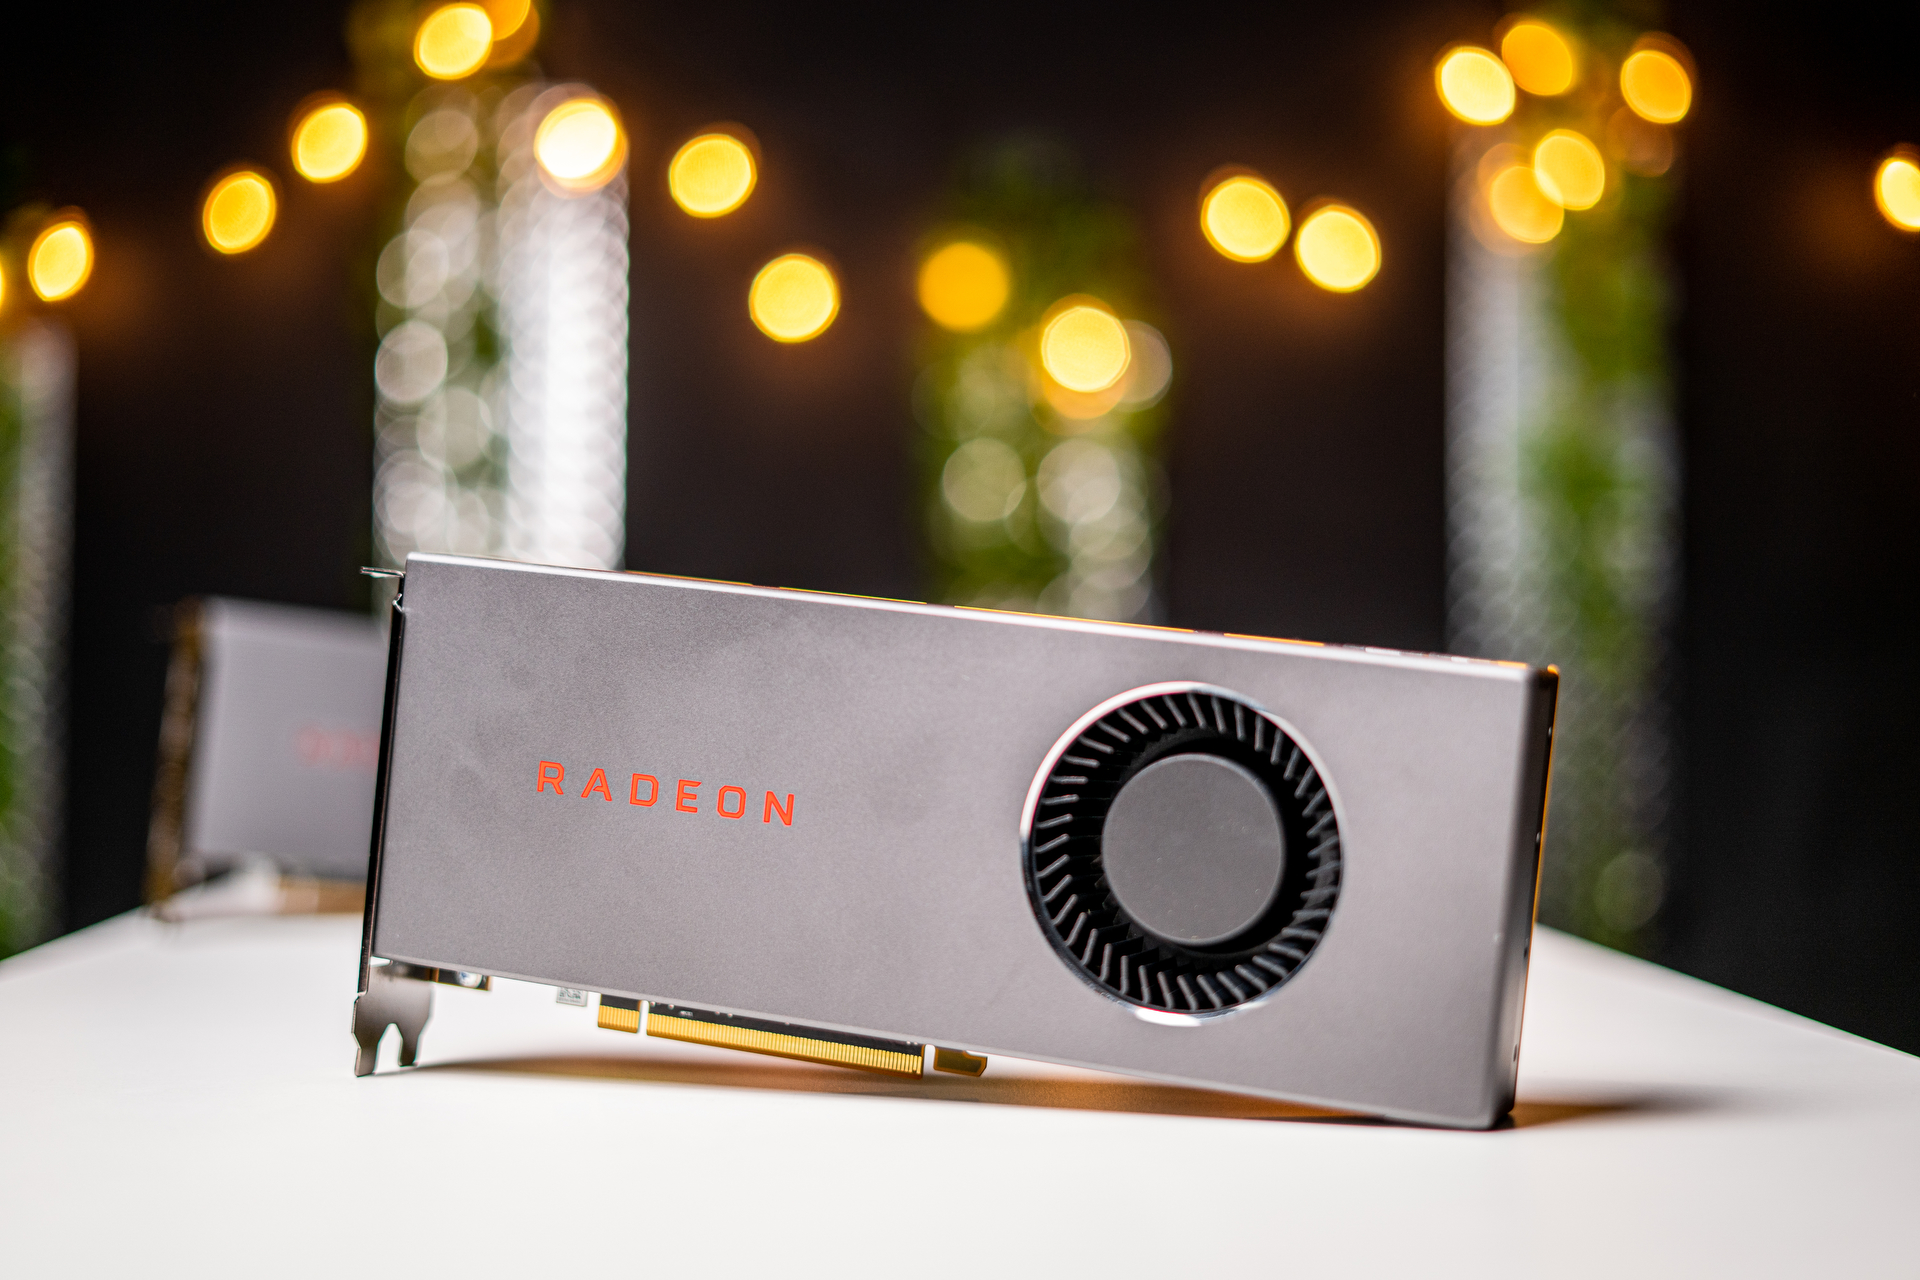 AMD Radeon RX 5700 and 5700 XT review: Blazing new trails